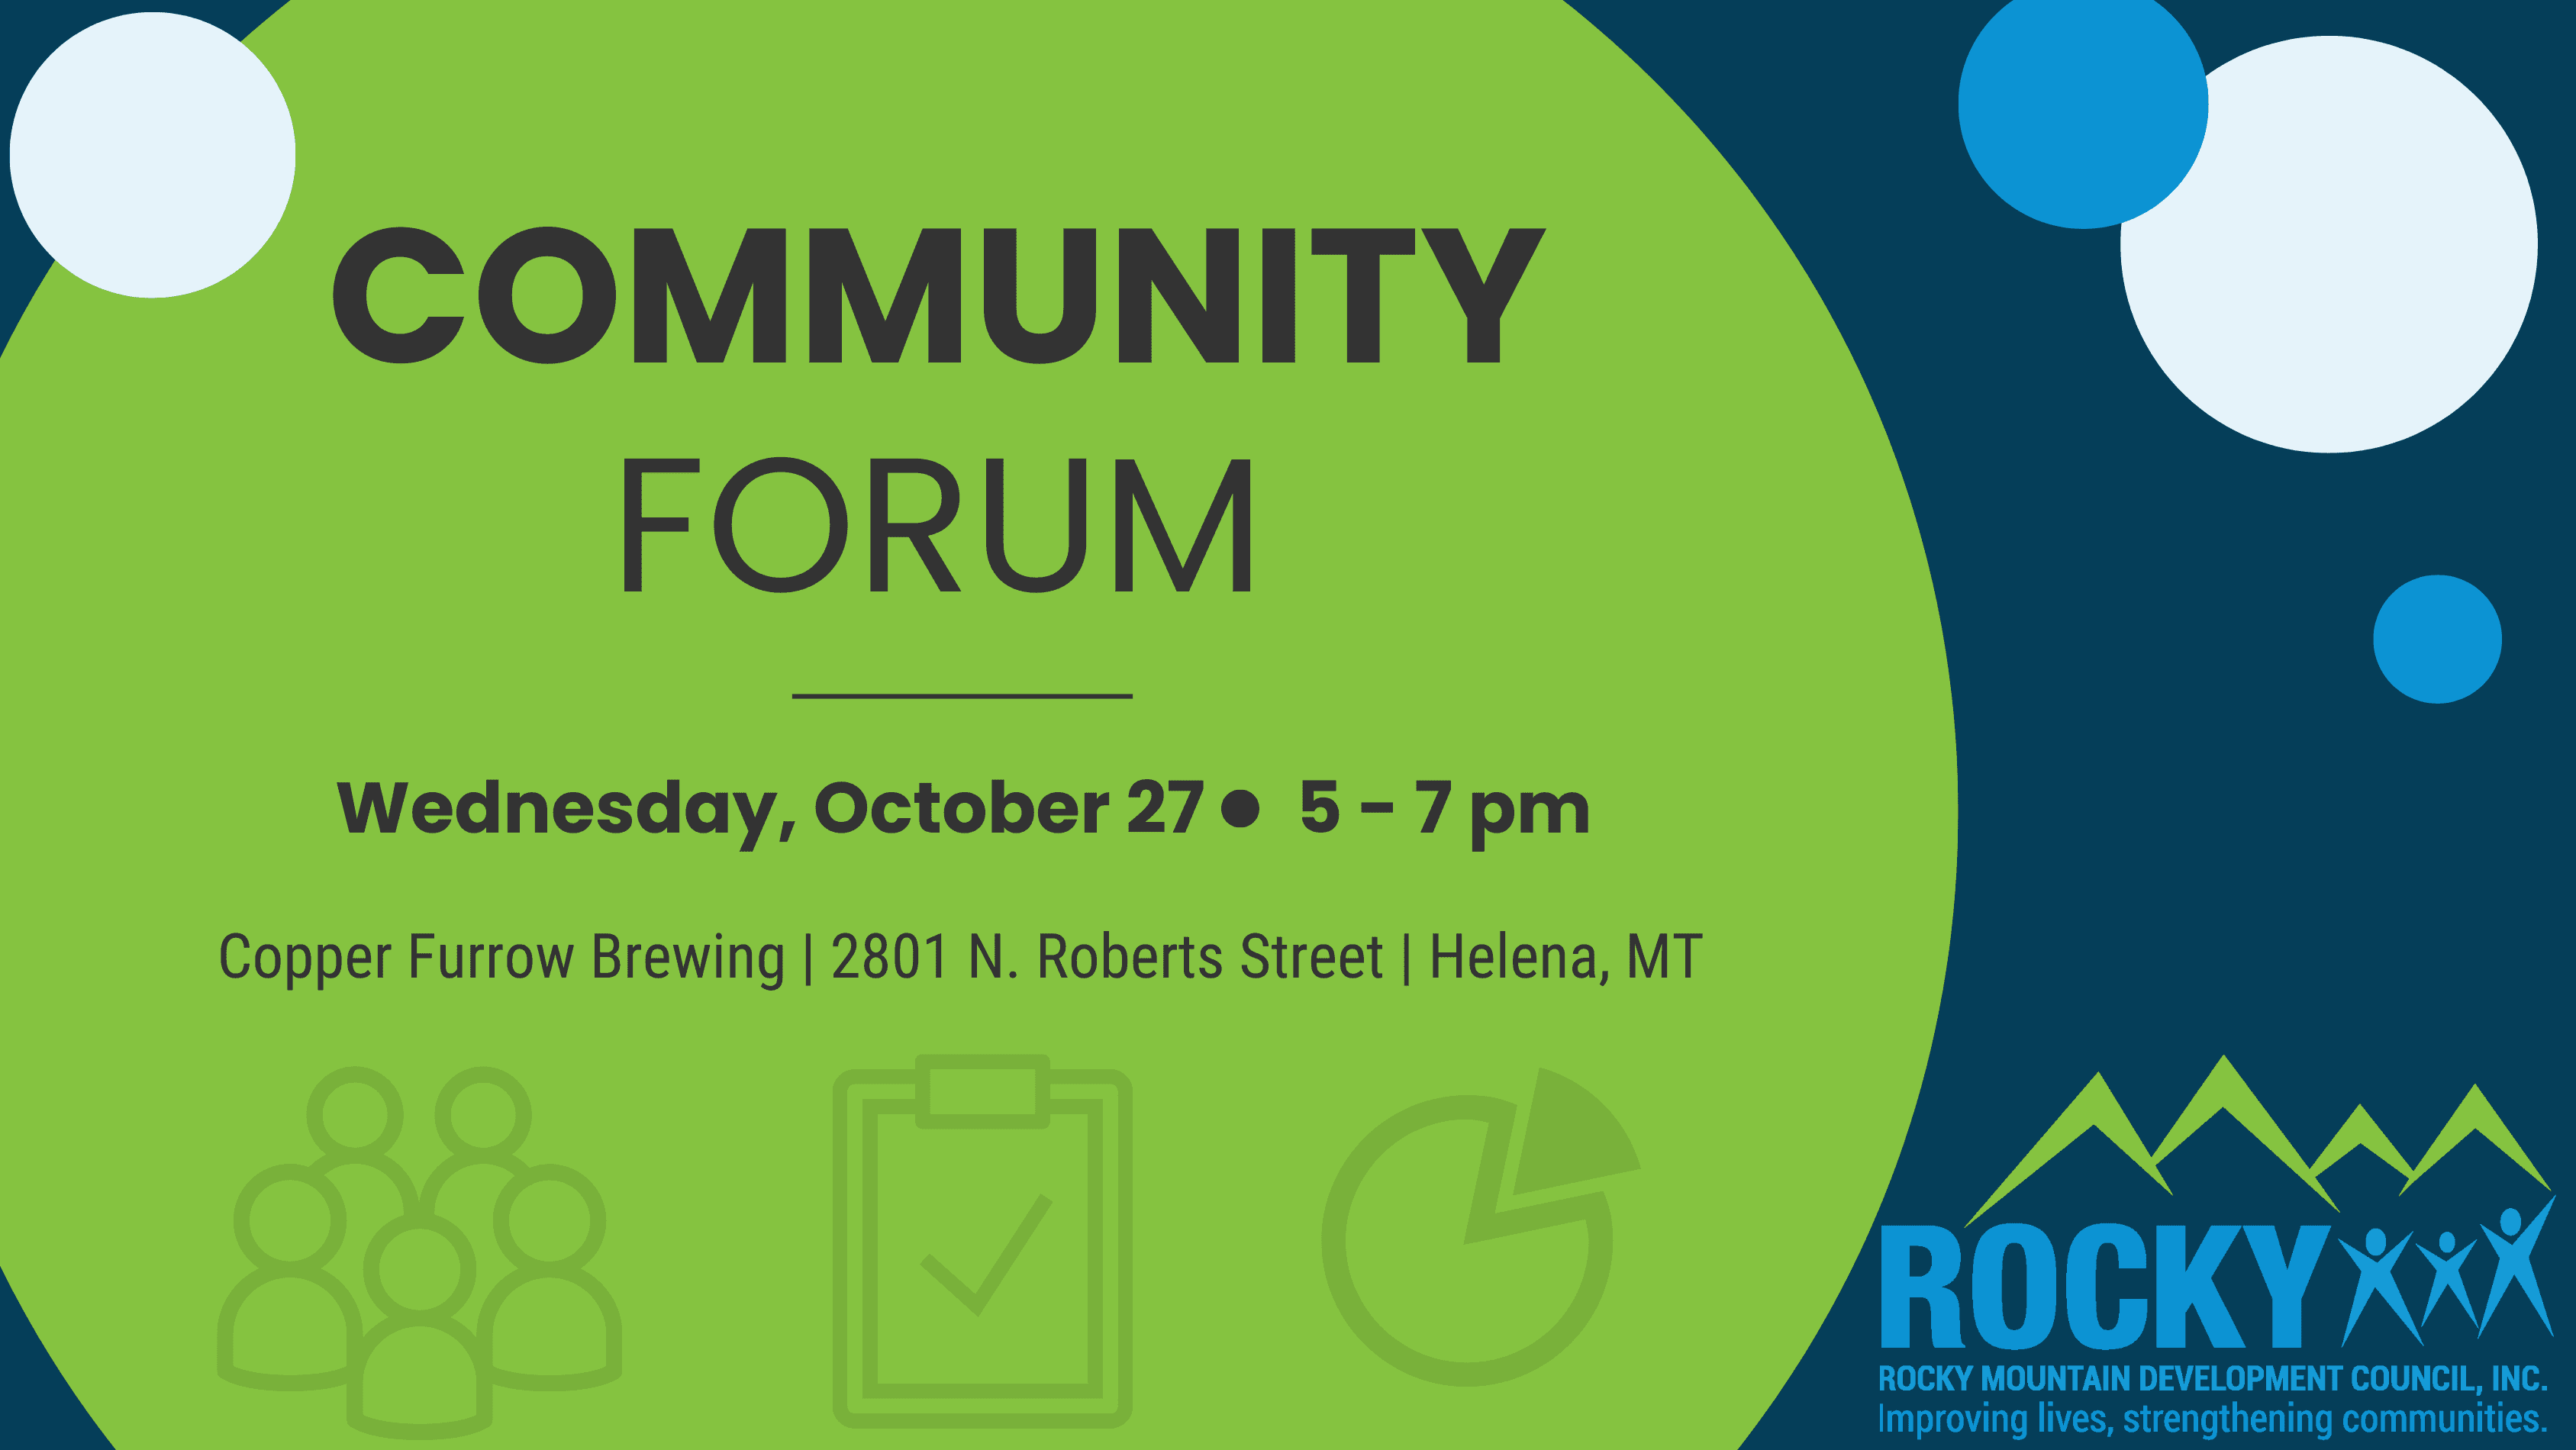 Rocky Mountain Development Council, Inc. (Rocky) is conducting a Comprehensive Community Needs Assessment and will hold a community forum on Tuesday, October 19 at the Missouri River Brewing Company (451 E. Spencer Court in East Helena) from 5 pm - 7 pm i